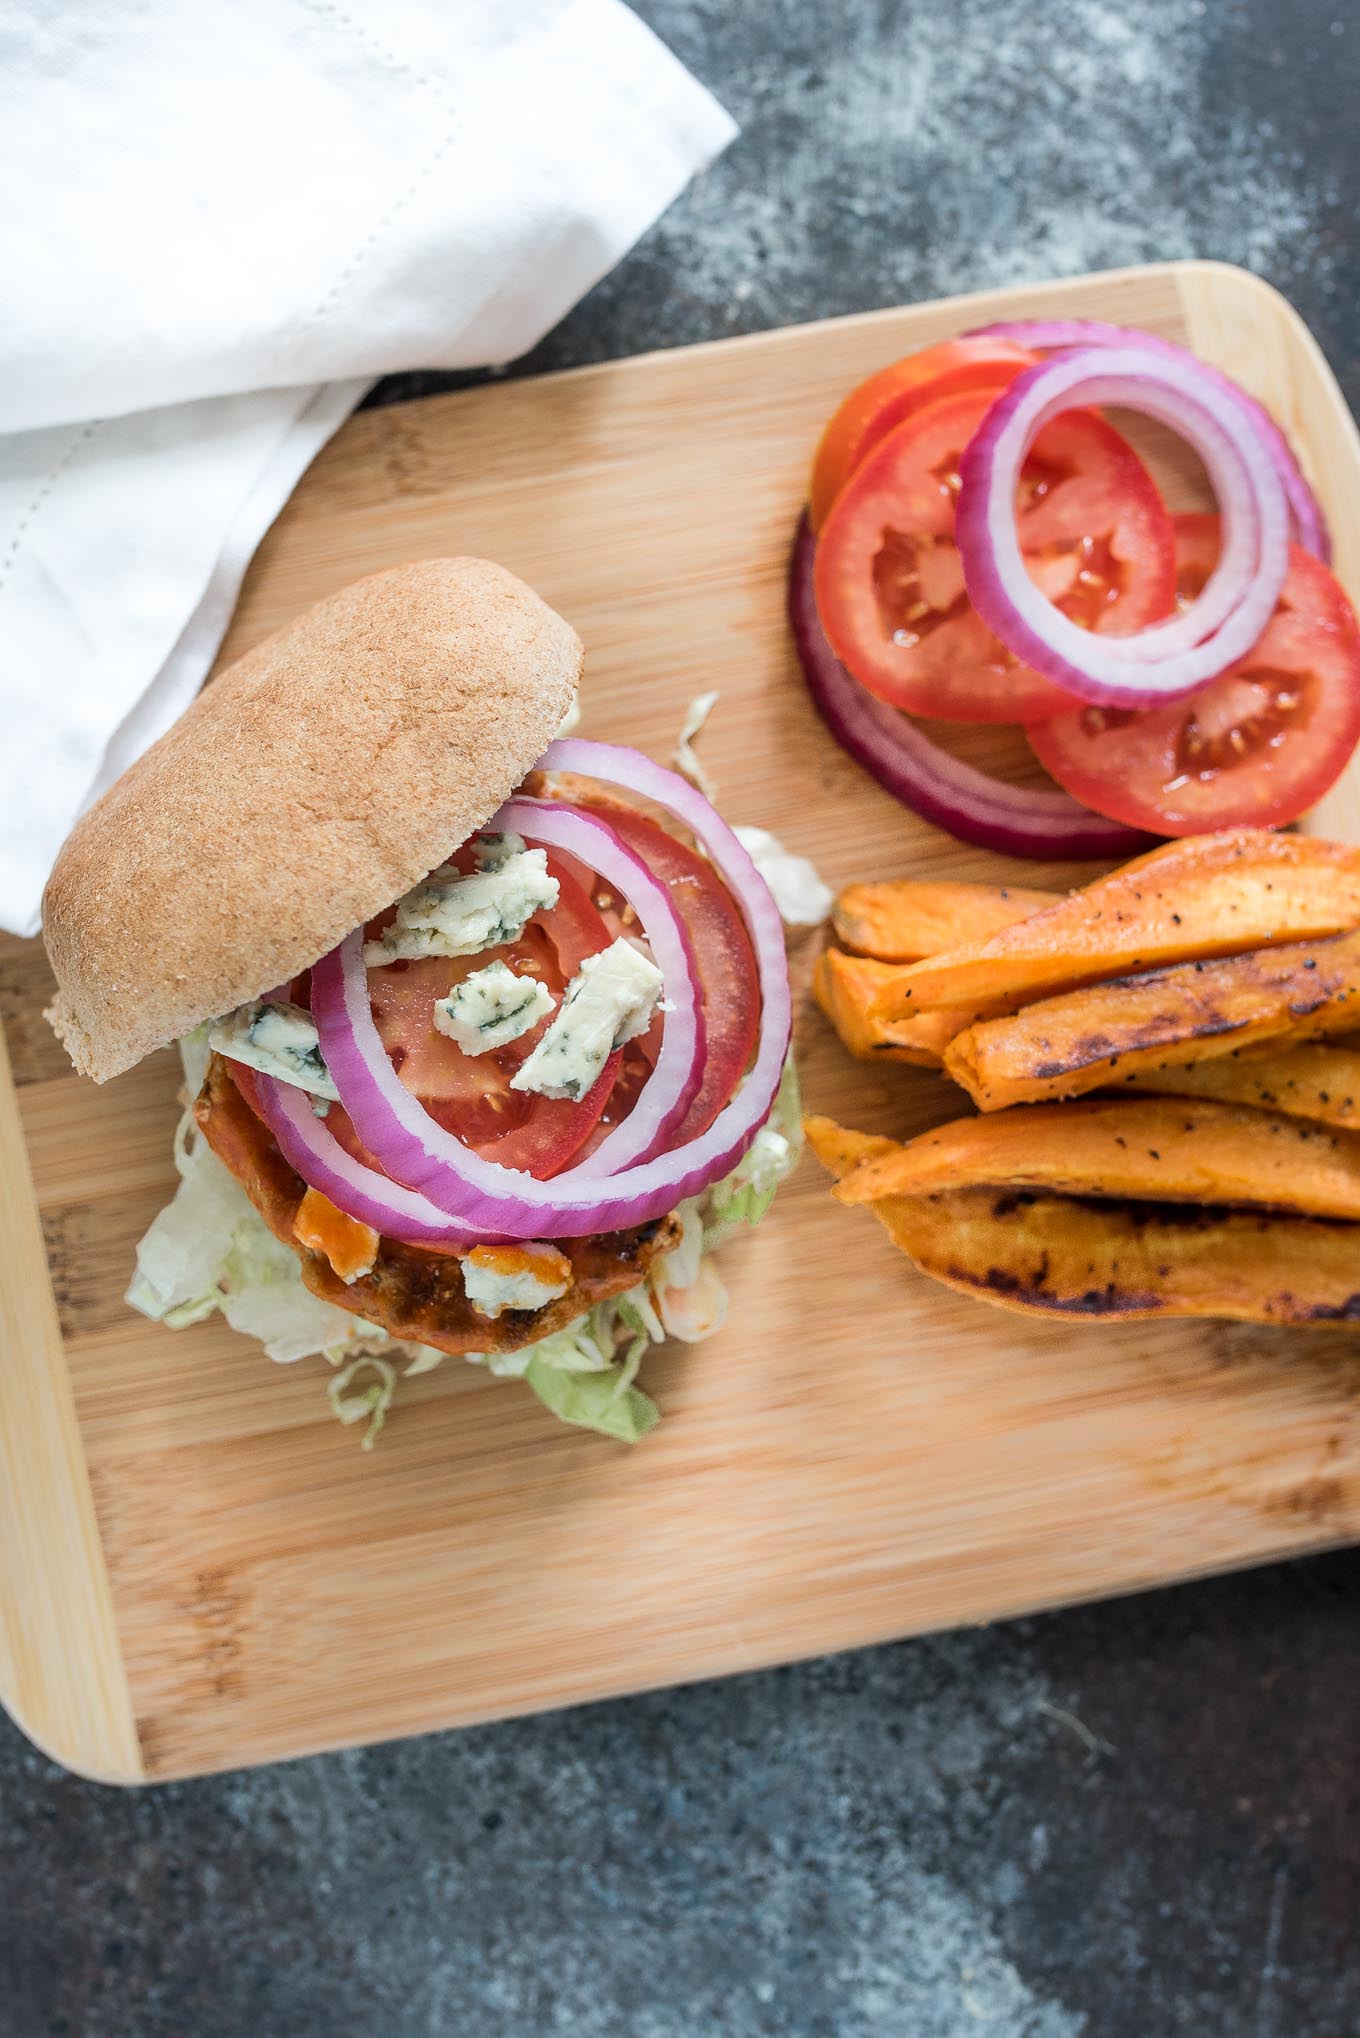 Skip the fried wings and make some easy and tasty Buffalo Turkey Burgers. For a low carb version serve them in lettuce wraps instead of on a bun!